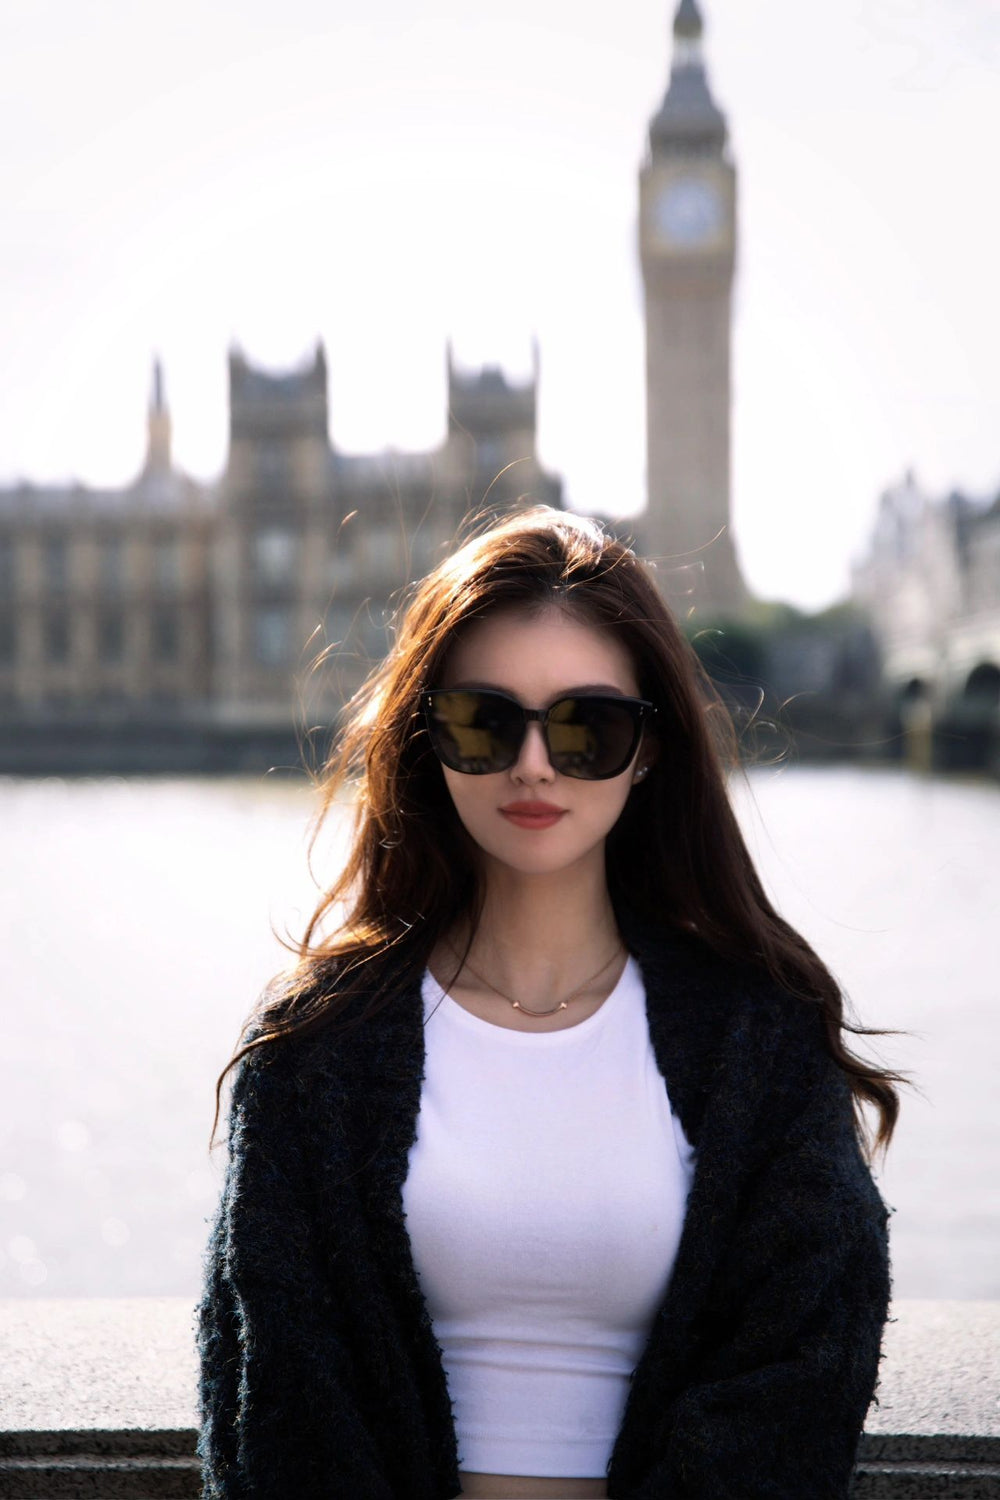 A woman in korean fashion sunglasses and white shirt stands before the iconic Big Ben.